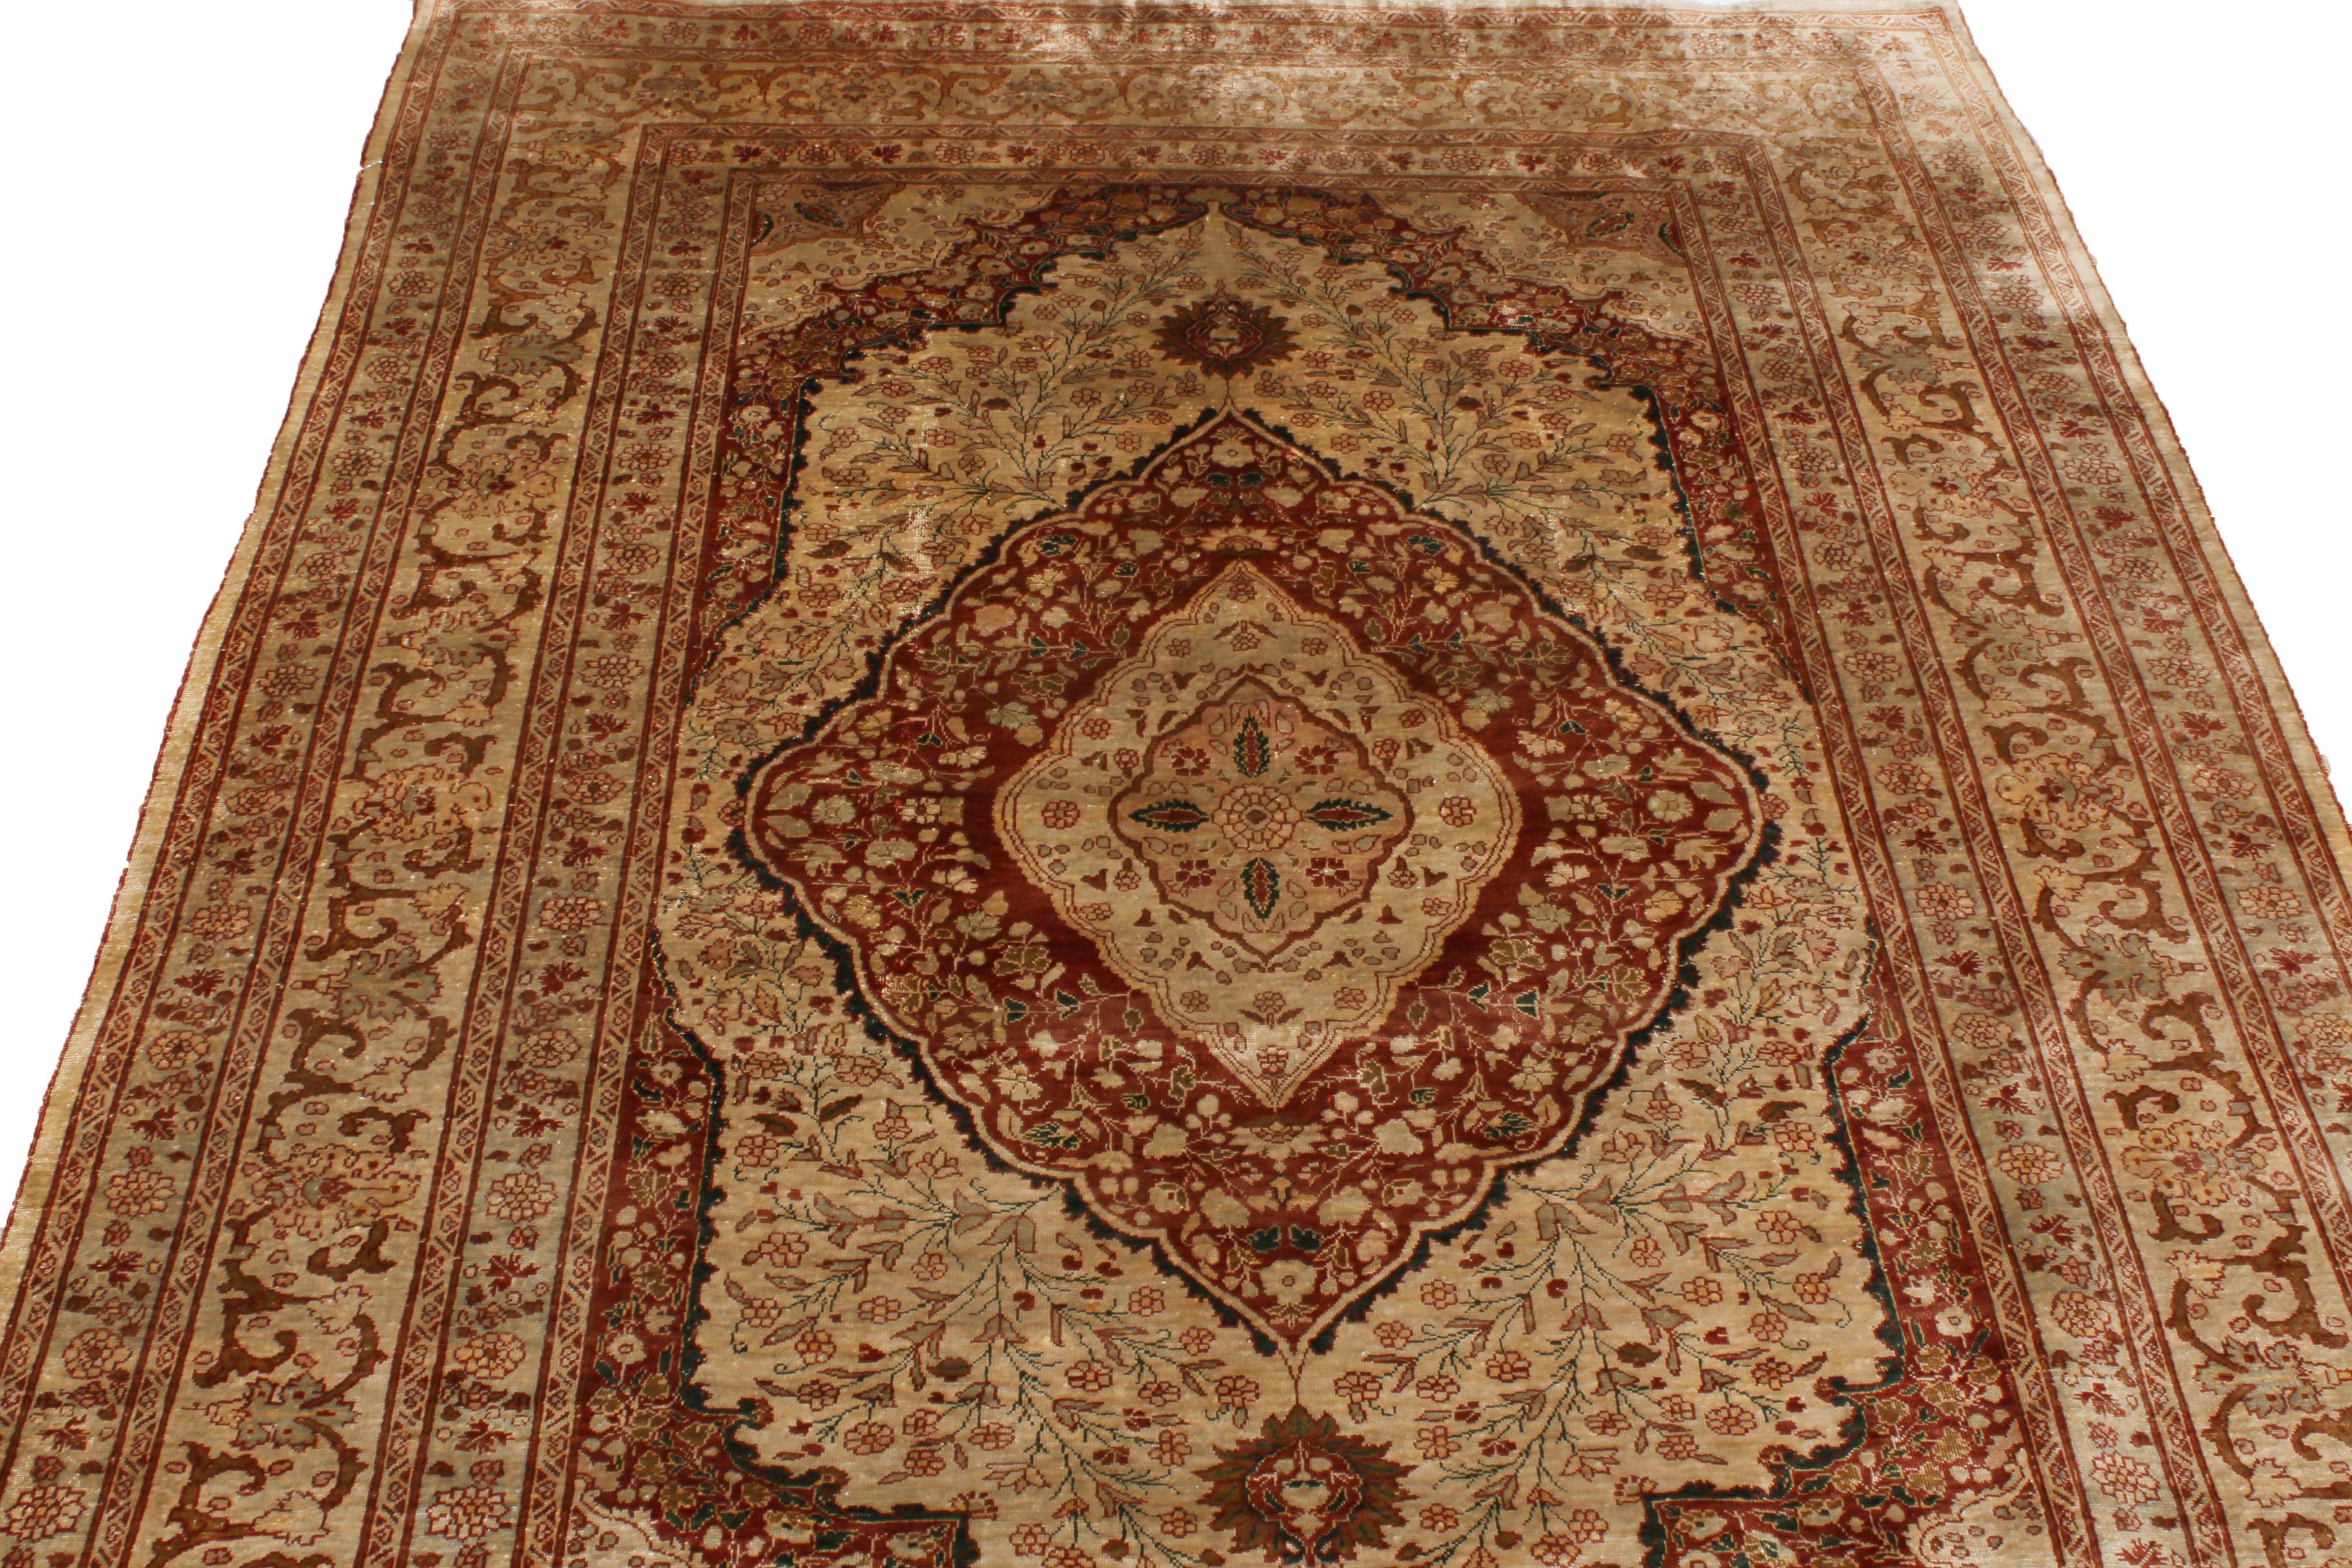 Hand-knotted in a lightly distressed, luminous silk body originating from Persia in 1900, this antique Tabriz Persian rug enjoys an uncommon dimensionality in the pairing of this rare beige and pink colorways with an intricate field and border